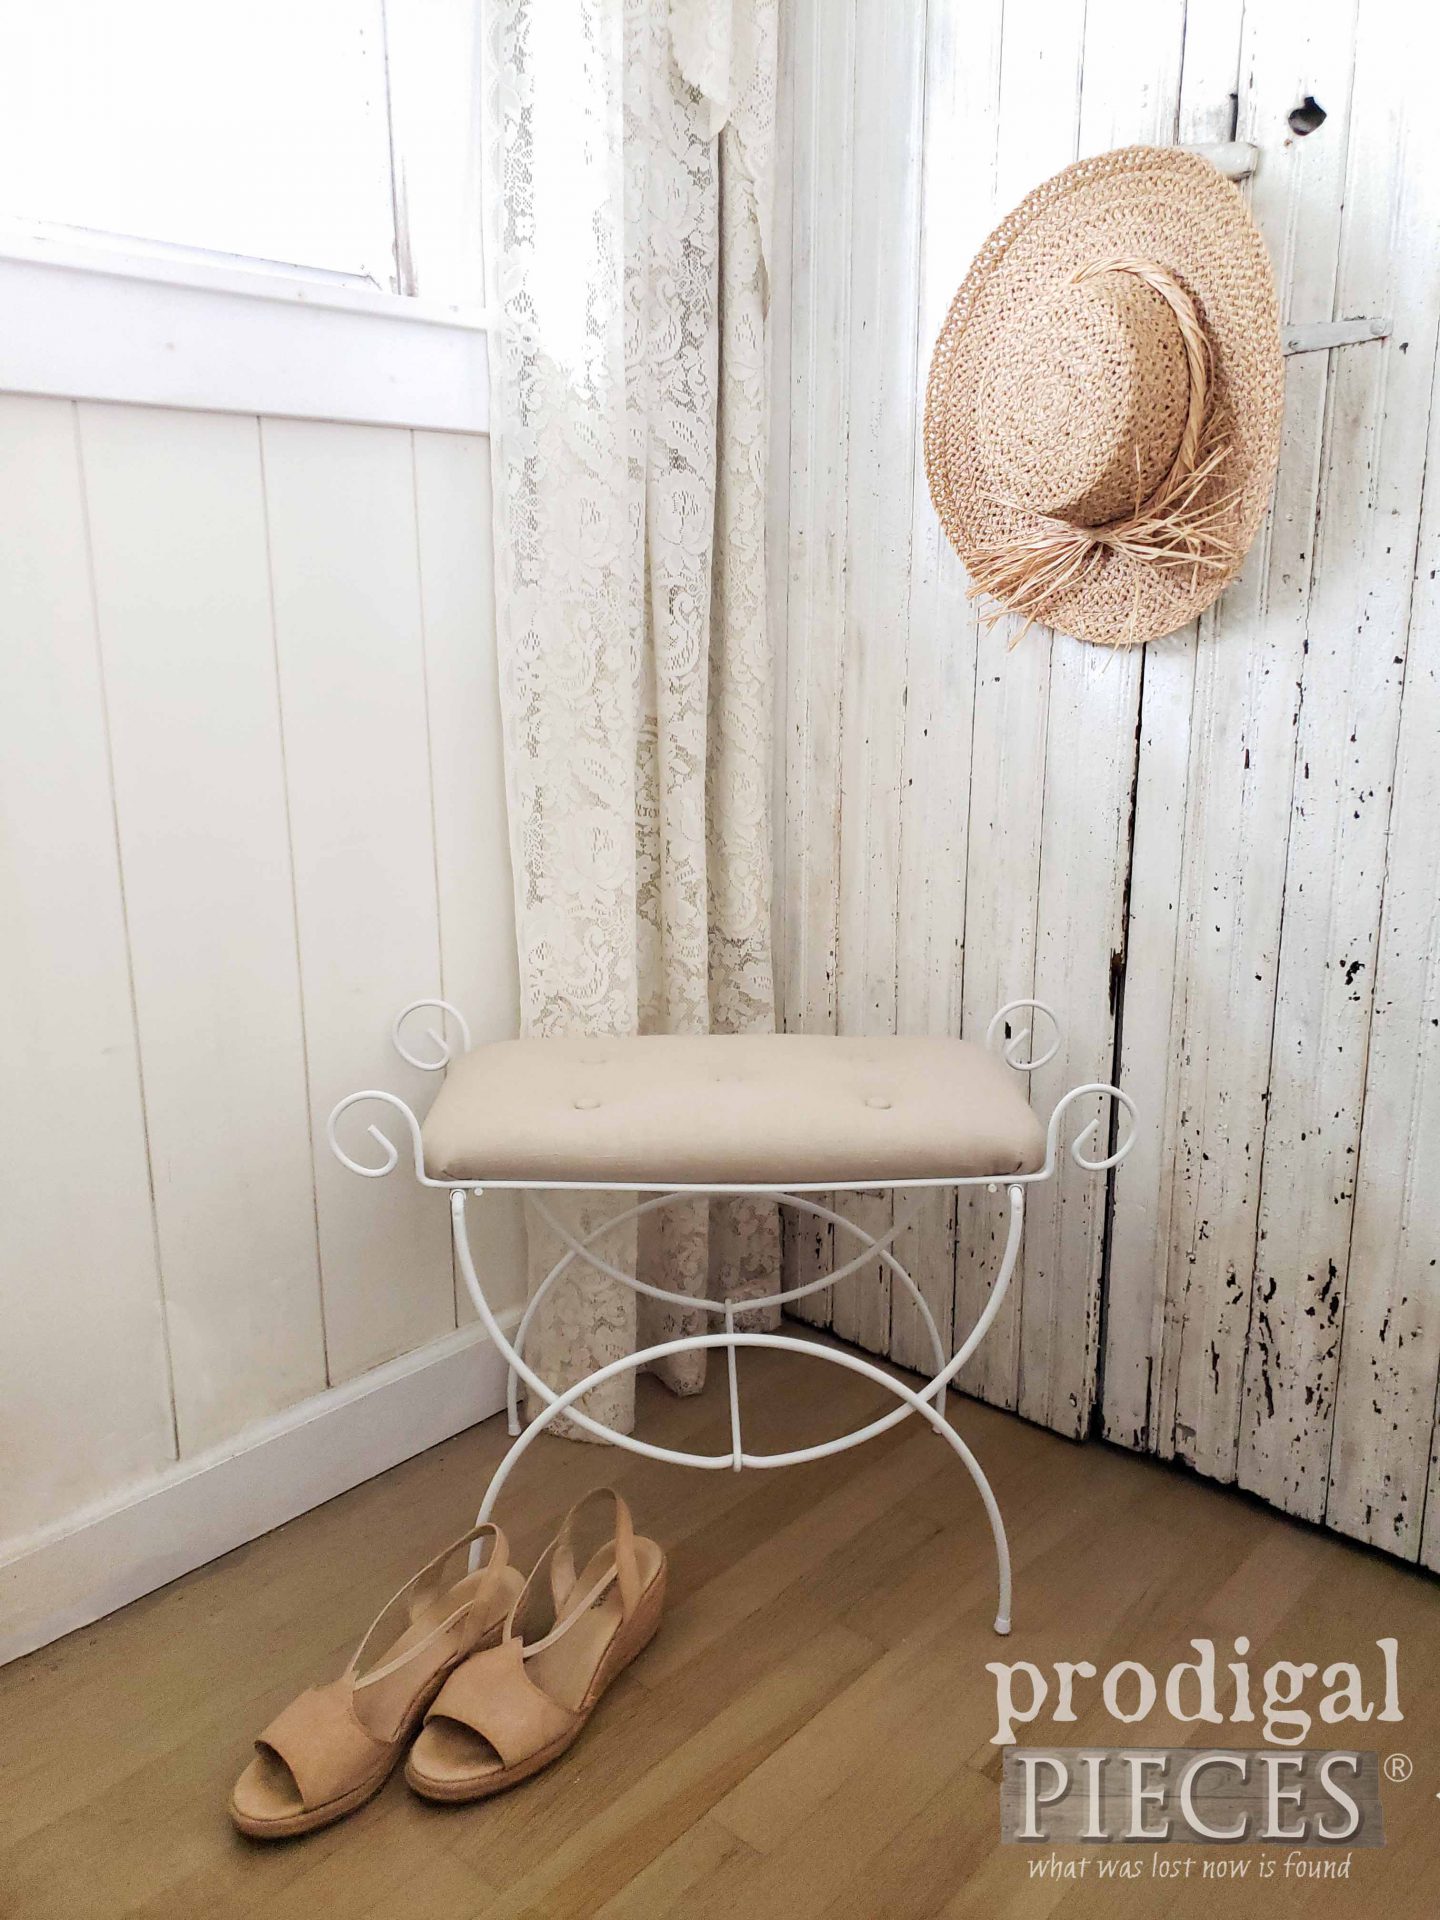 Tufted Linen Upholstered Vanity Seat by Larissa of Prodigal Pieces | prodigalpieces.com #prodigalpieces #furniture #diy #upholstery #linen #home #homedecor #farmhouse #shabbychic